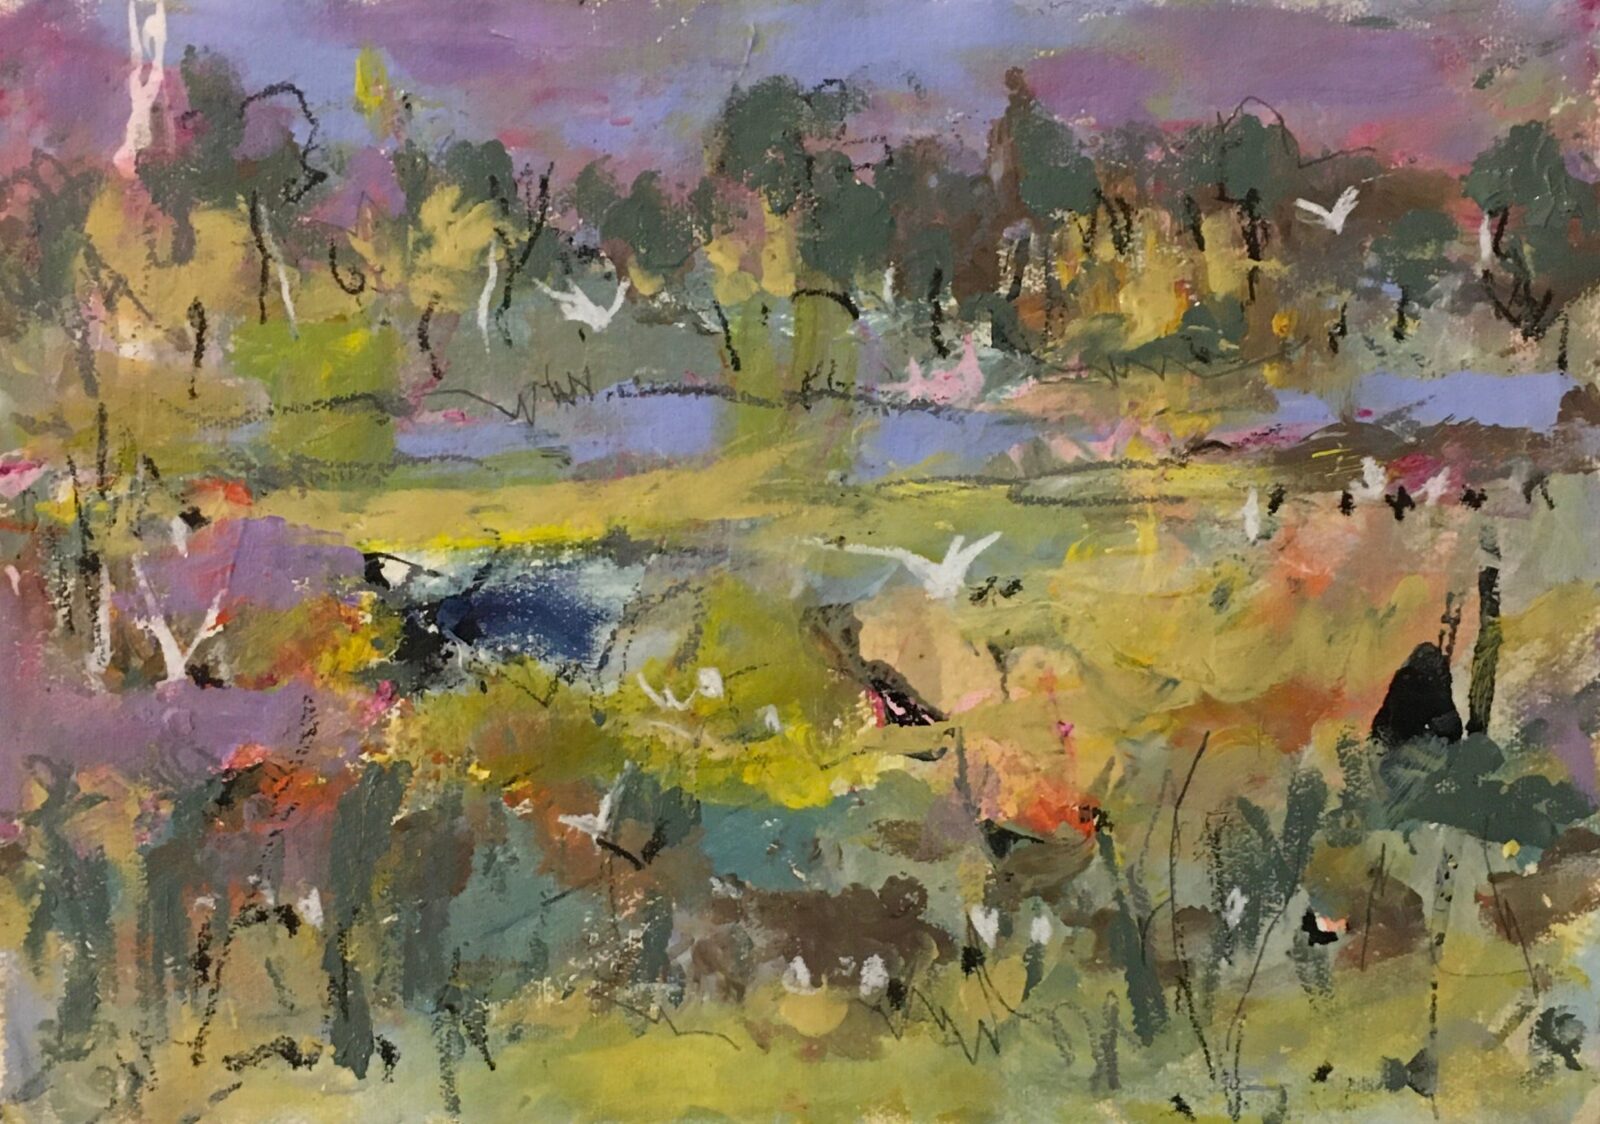 Rhonda's explores the outback in gestural works in a palette that reflects nature .